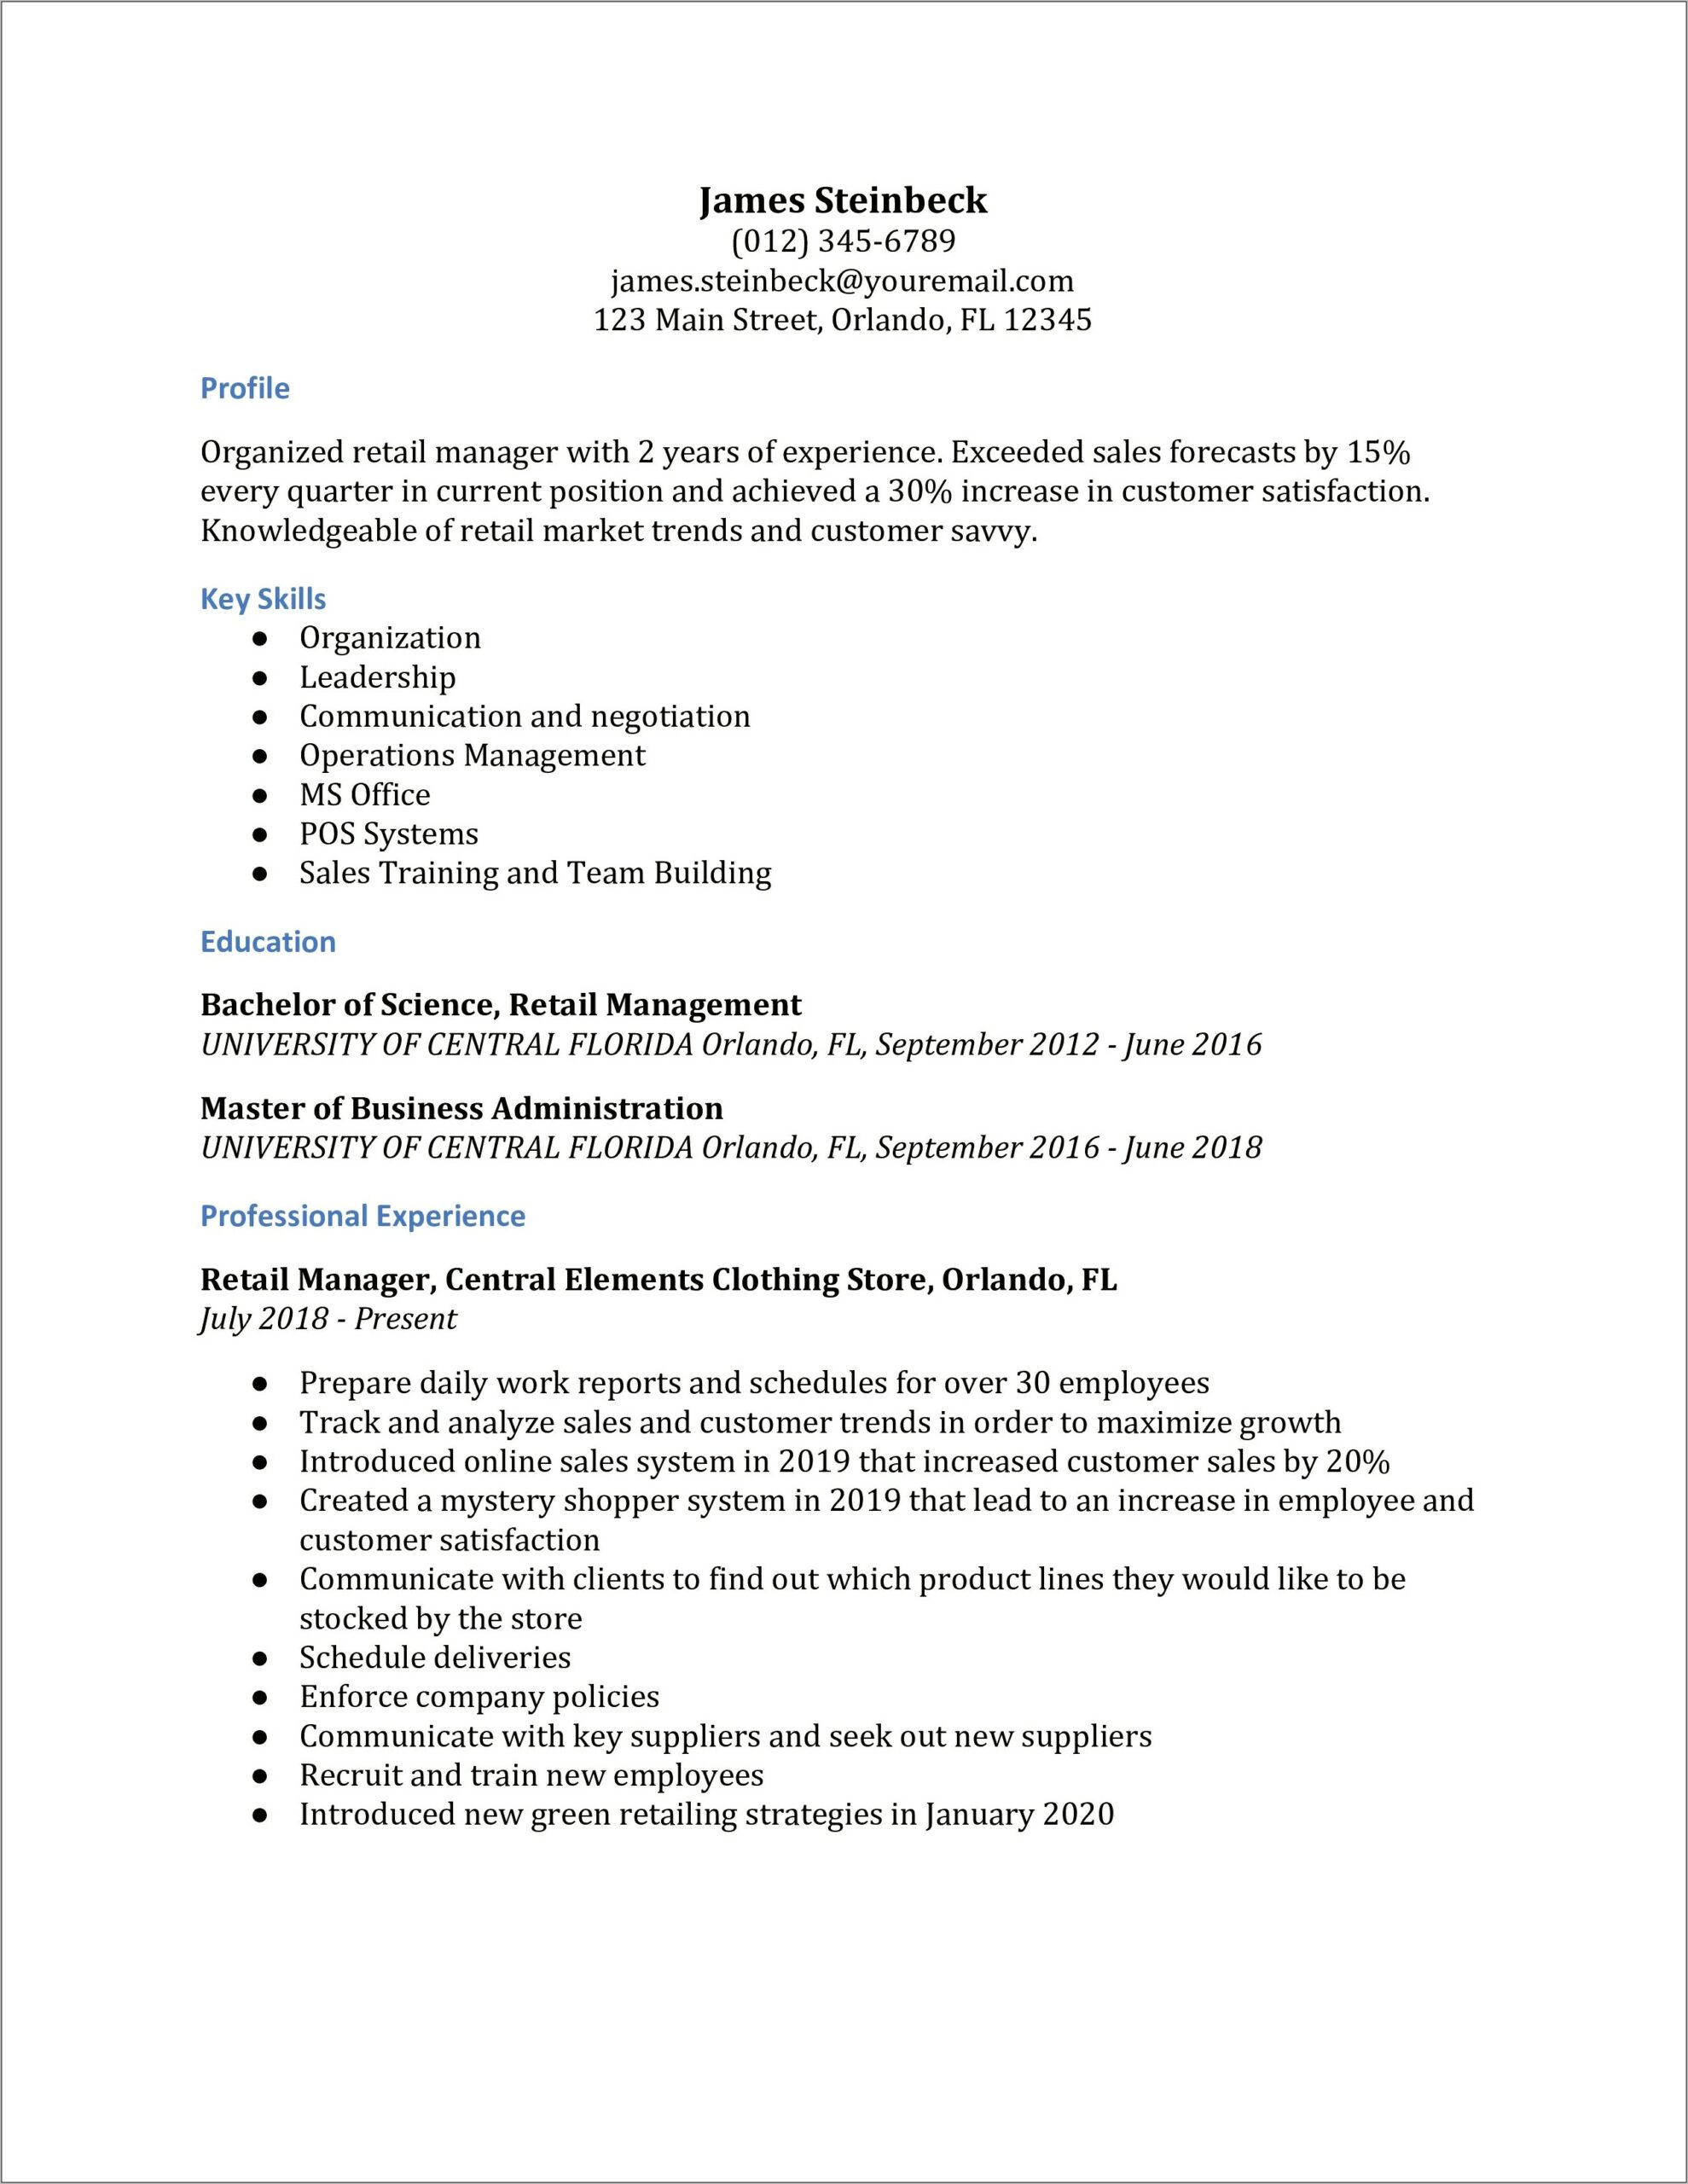 Resume Format For Retail Department Manager